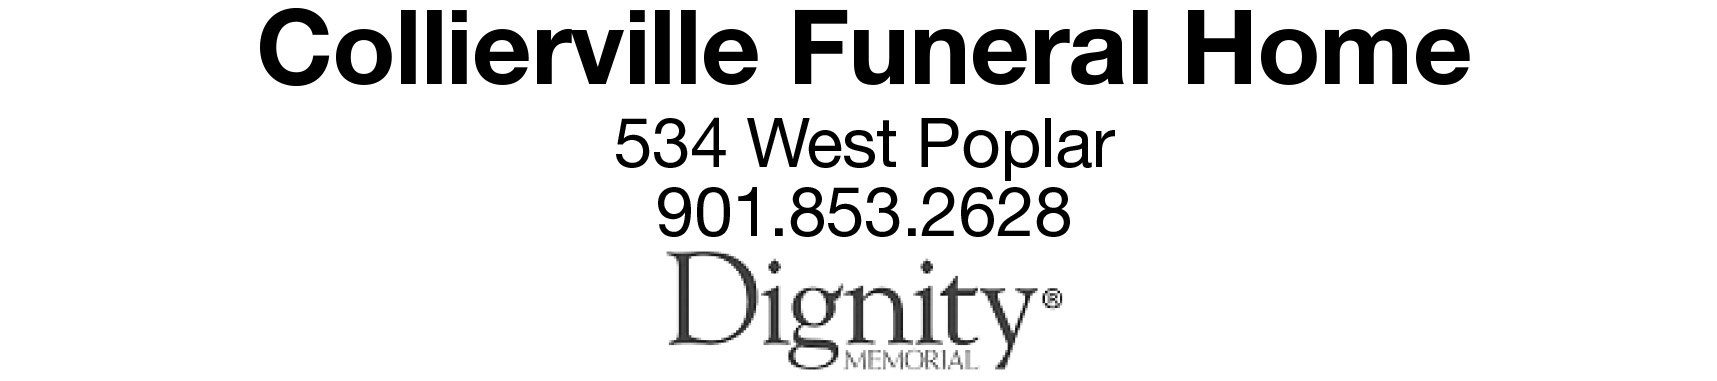 COLLIERVILLE FUNERAL HOME Memorials and Obituaries | We Remember